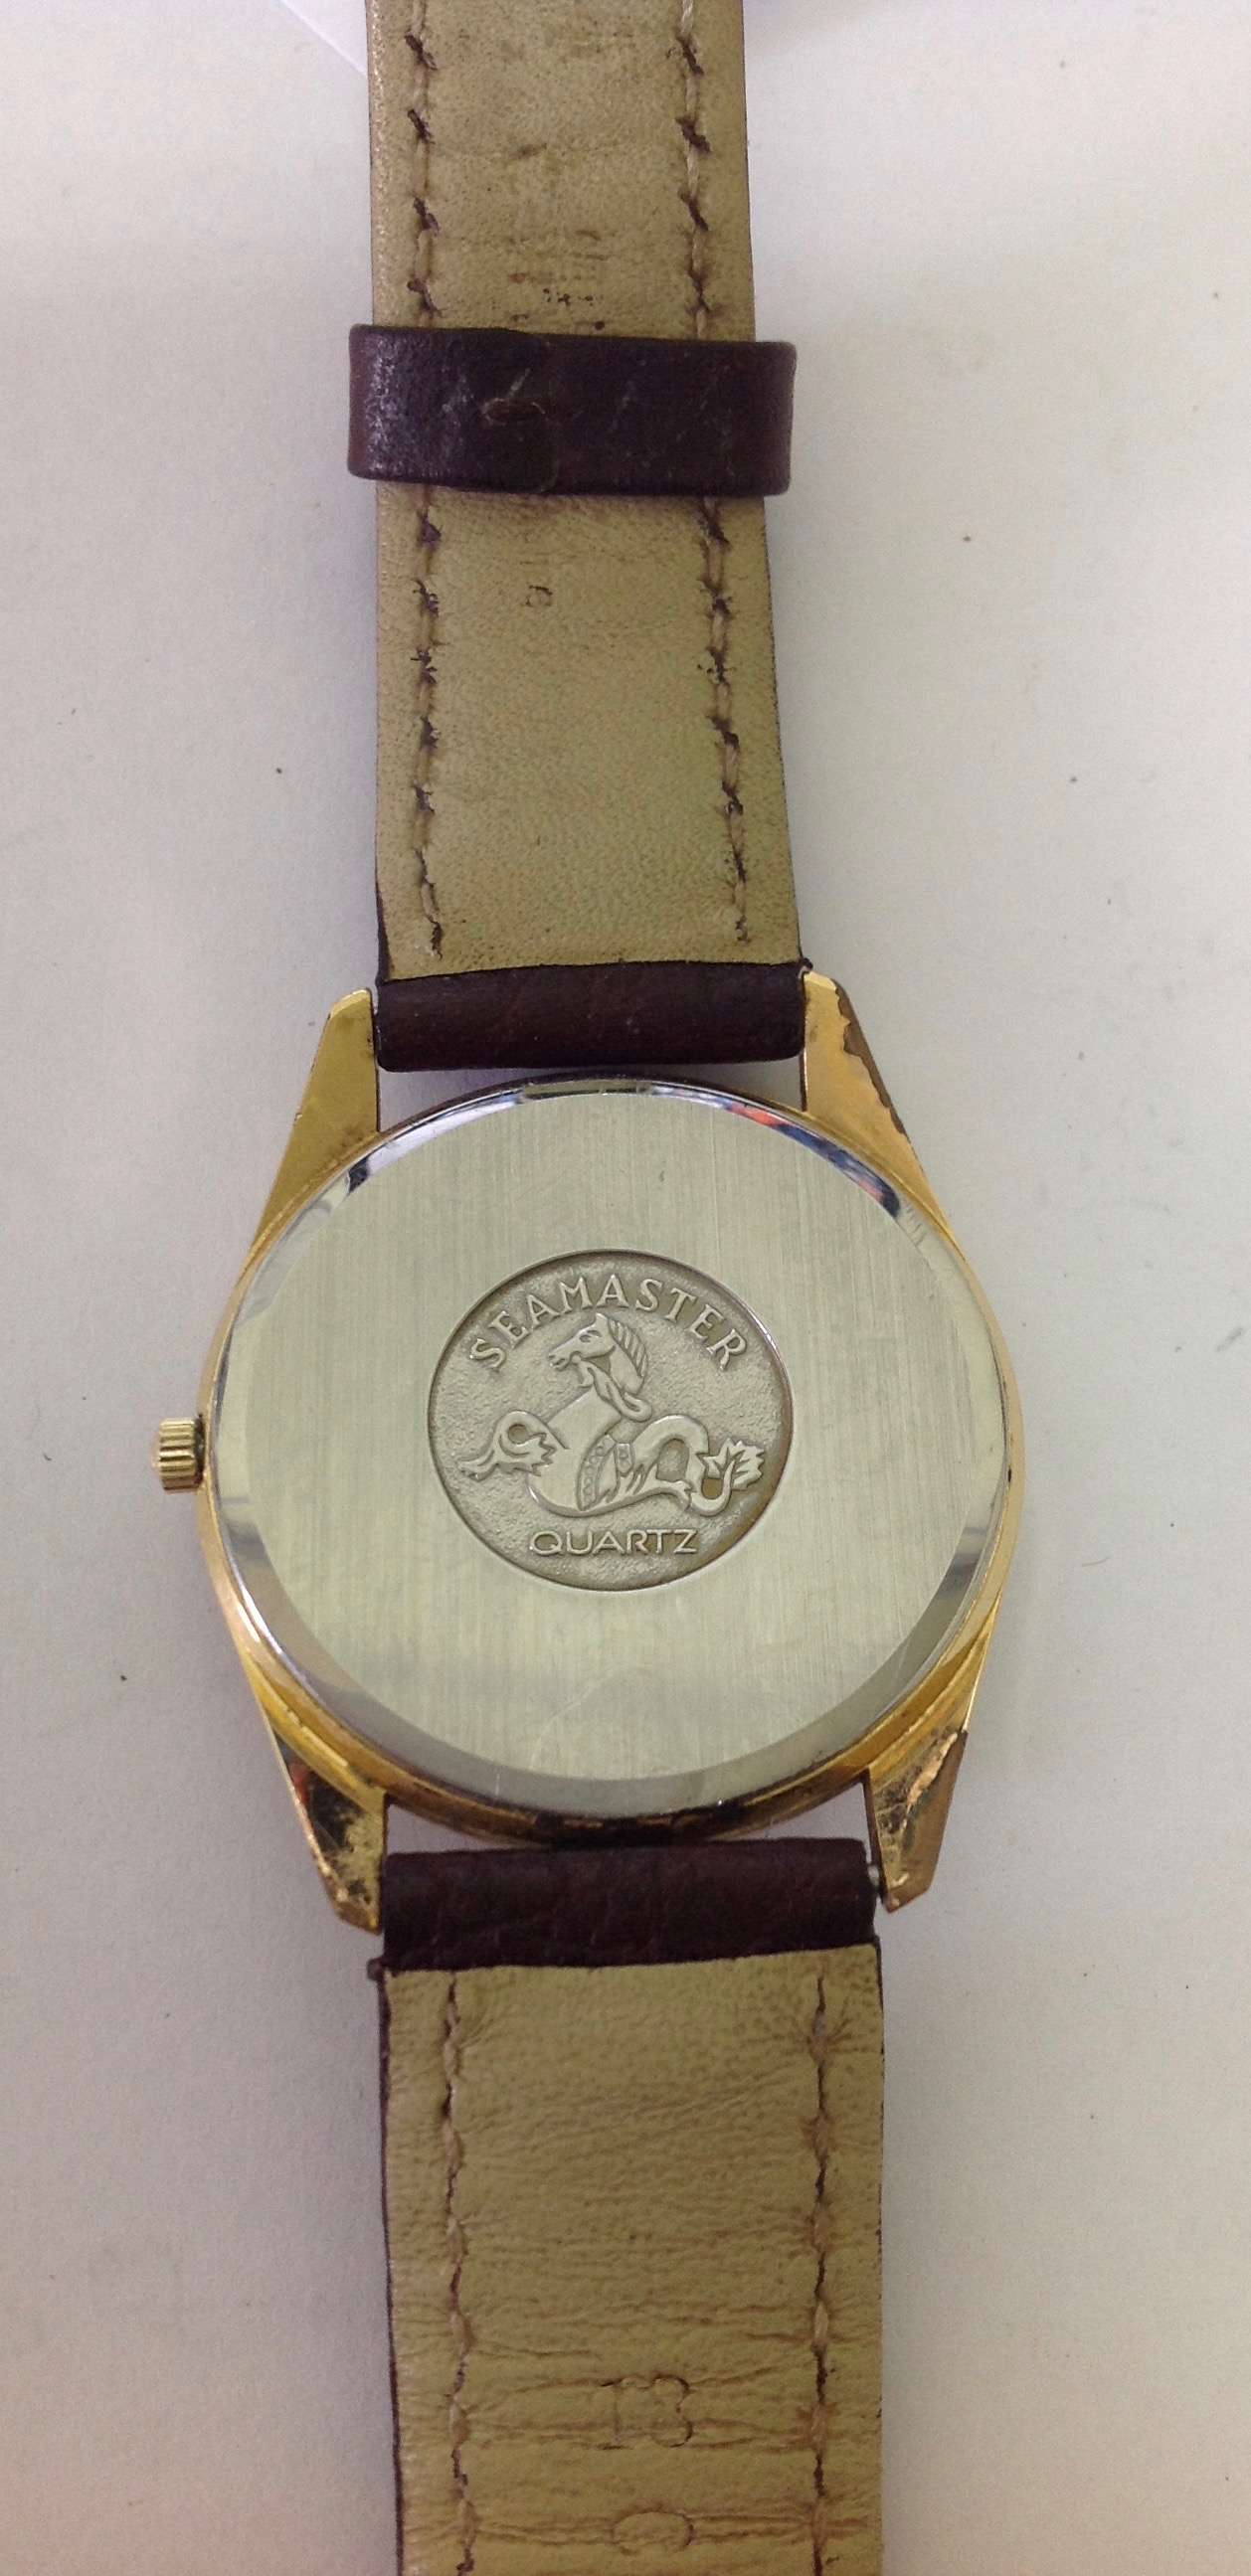 An Omega Seamaster gold plated wristwatch - Image 5 of 5